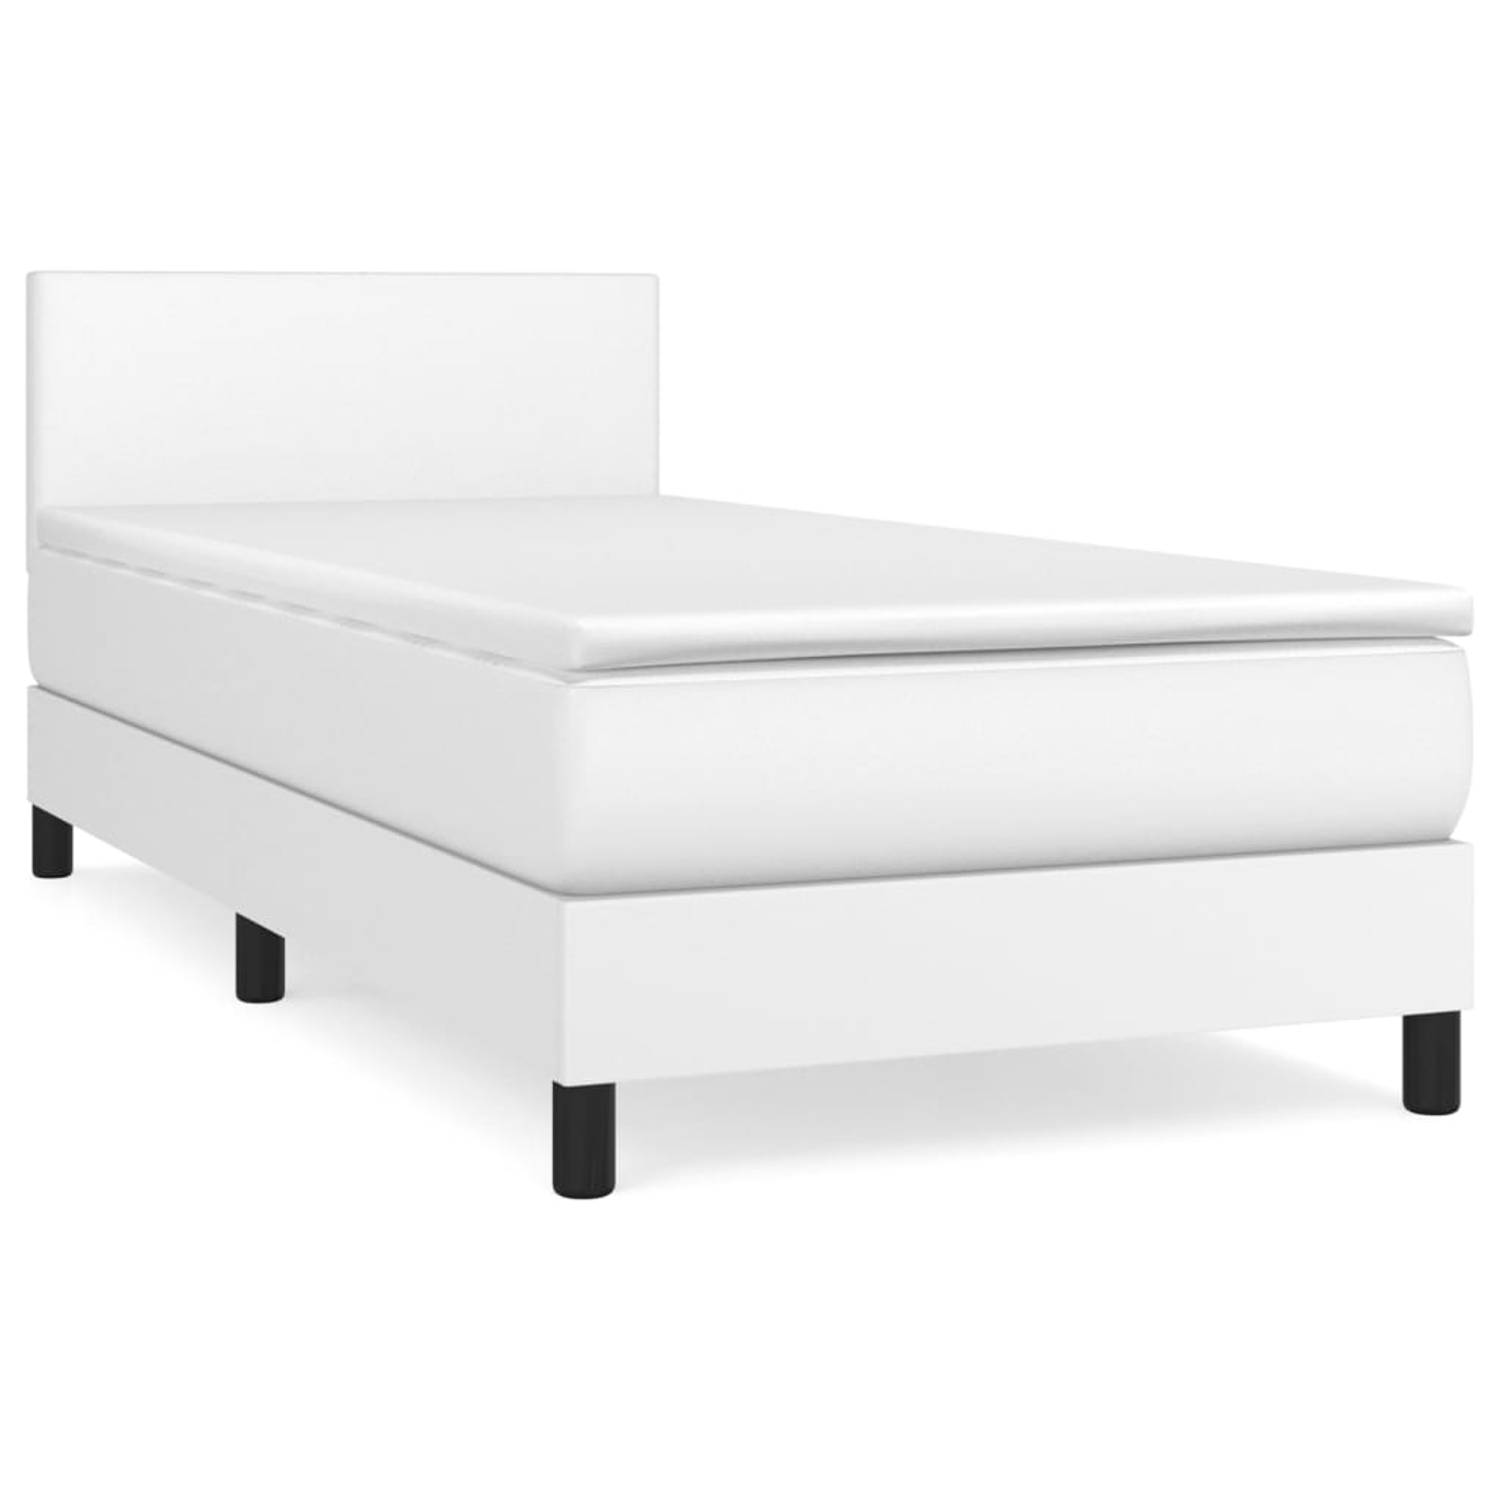 The Living Store Boxspringbed - - Bed - 203 x 80 x 78/88 cm - Duurzaam kunstleer